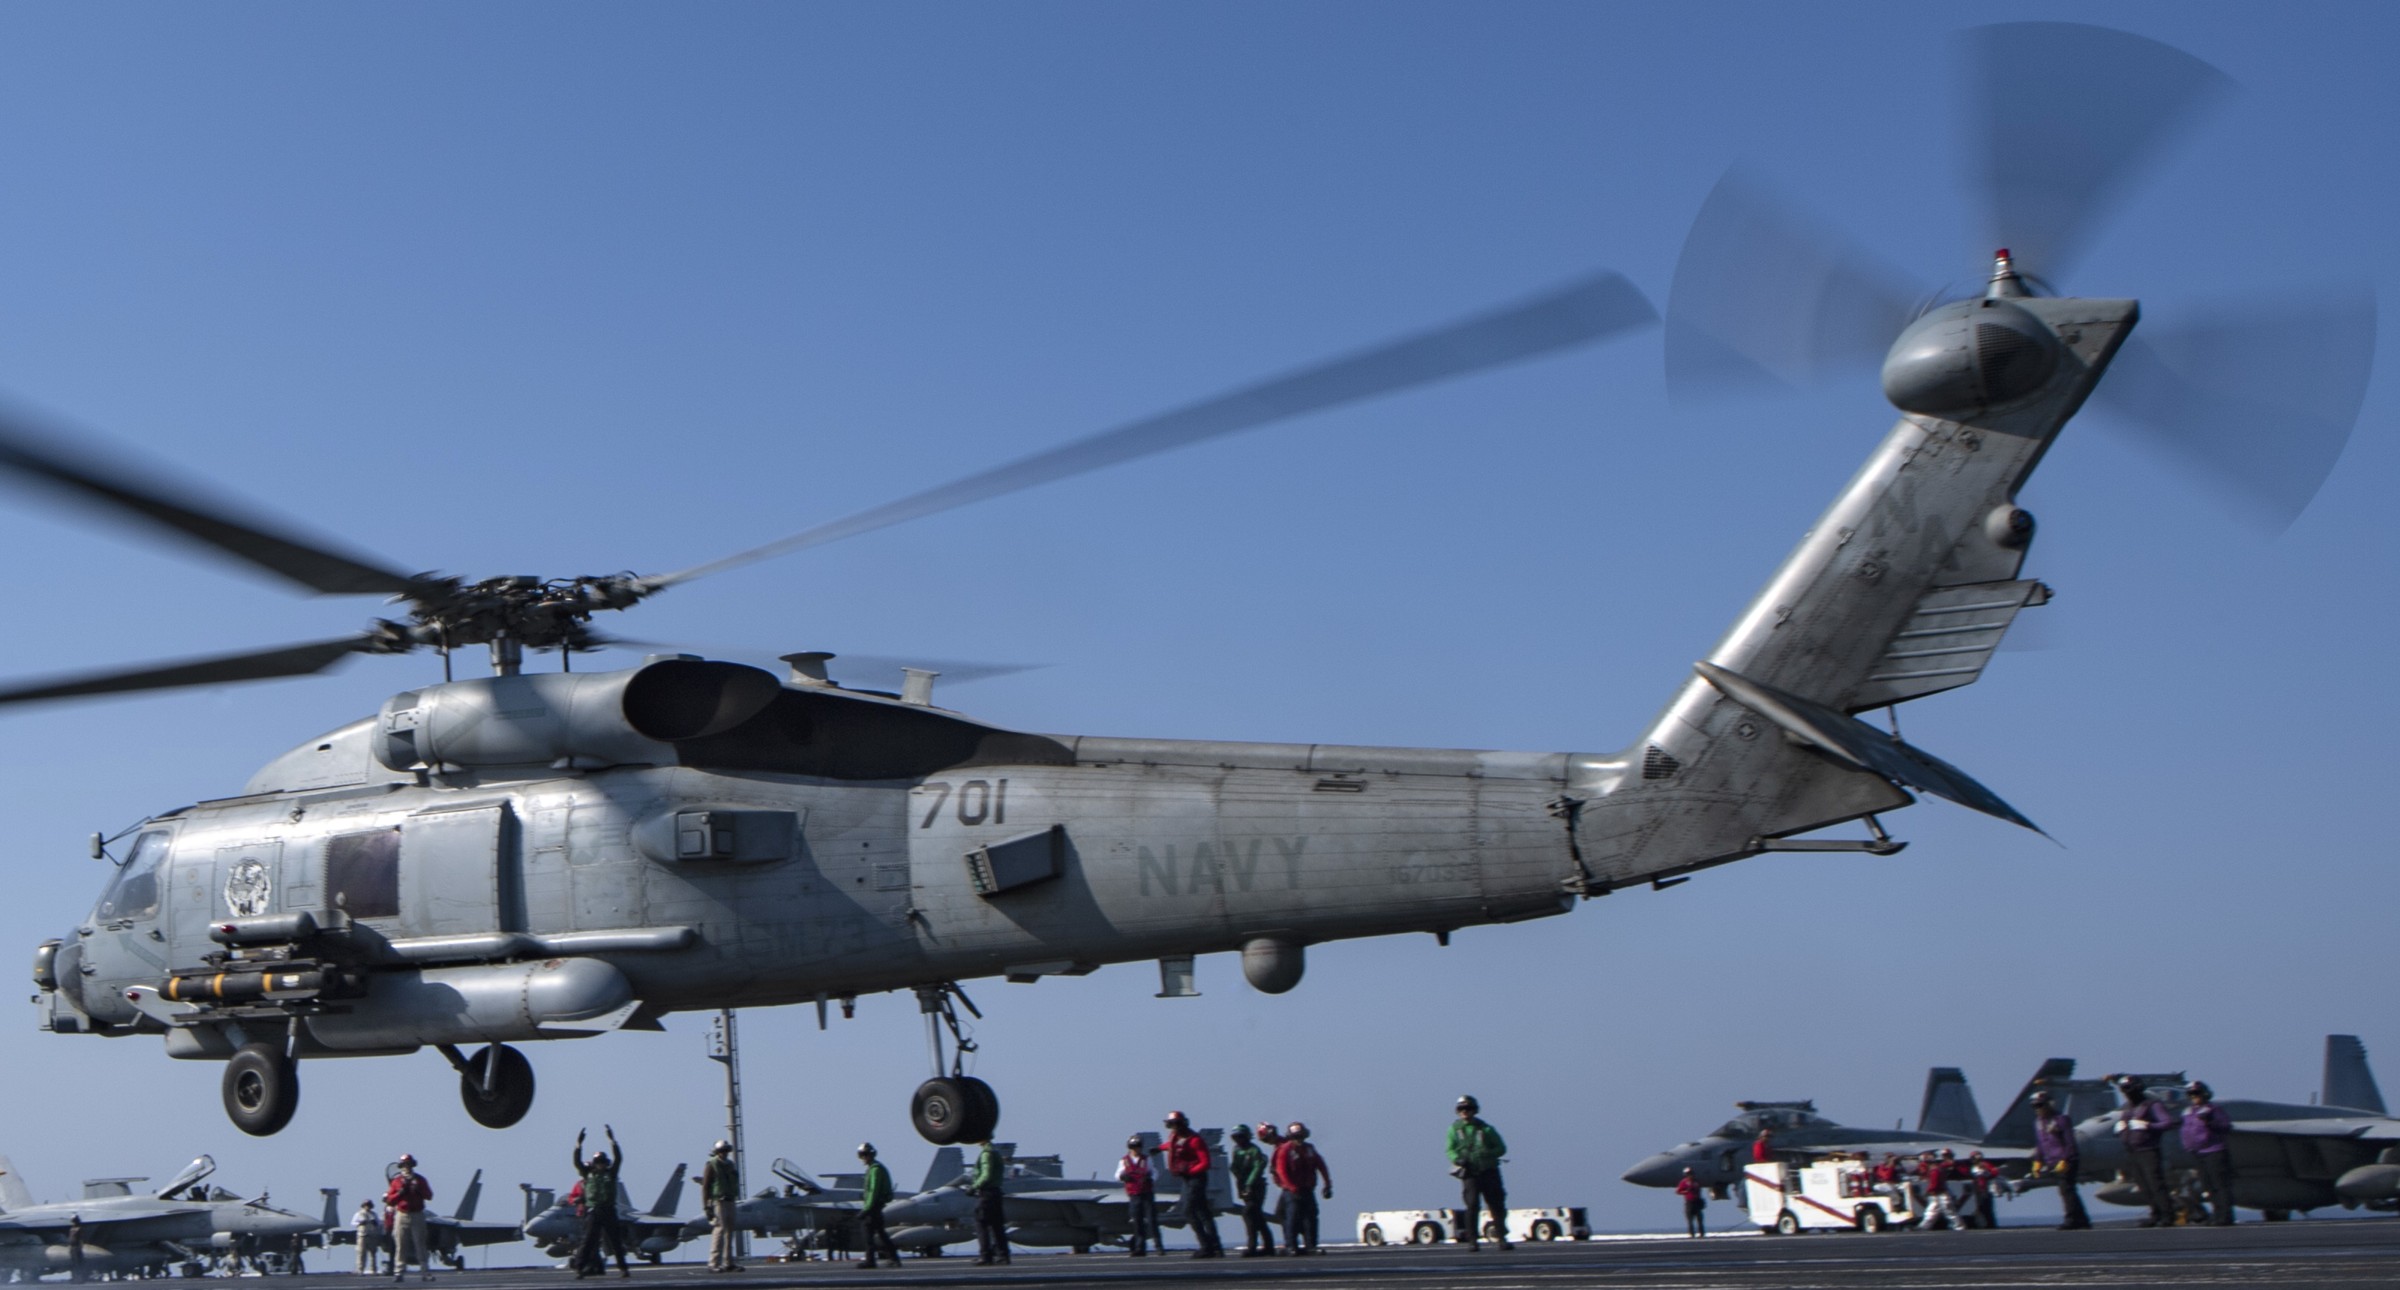 hsm-73 battlecats helicopter maritime strike squadron us navy mh-60r seahawk 2013 37